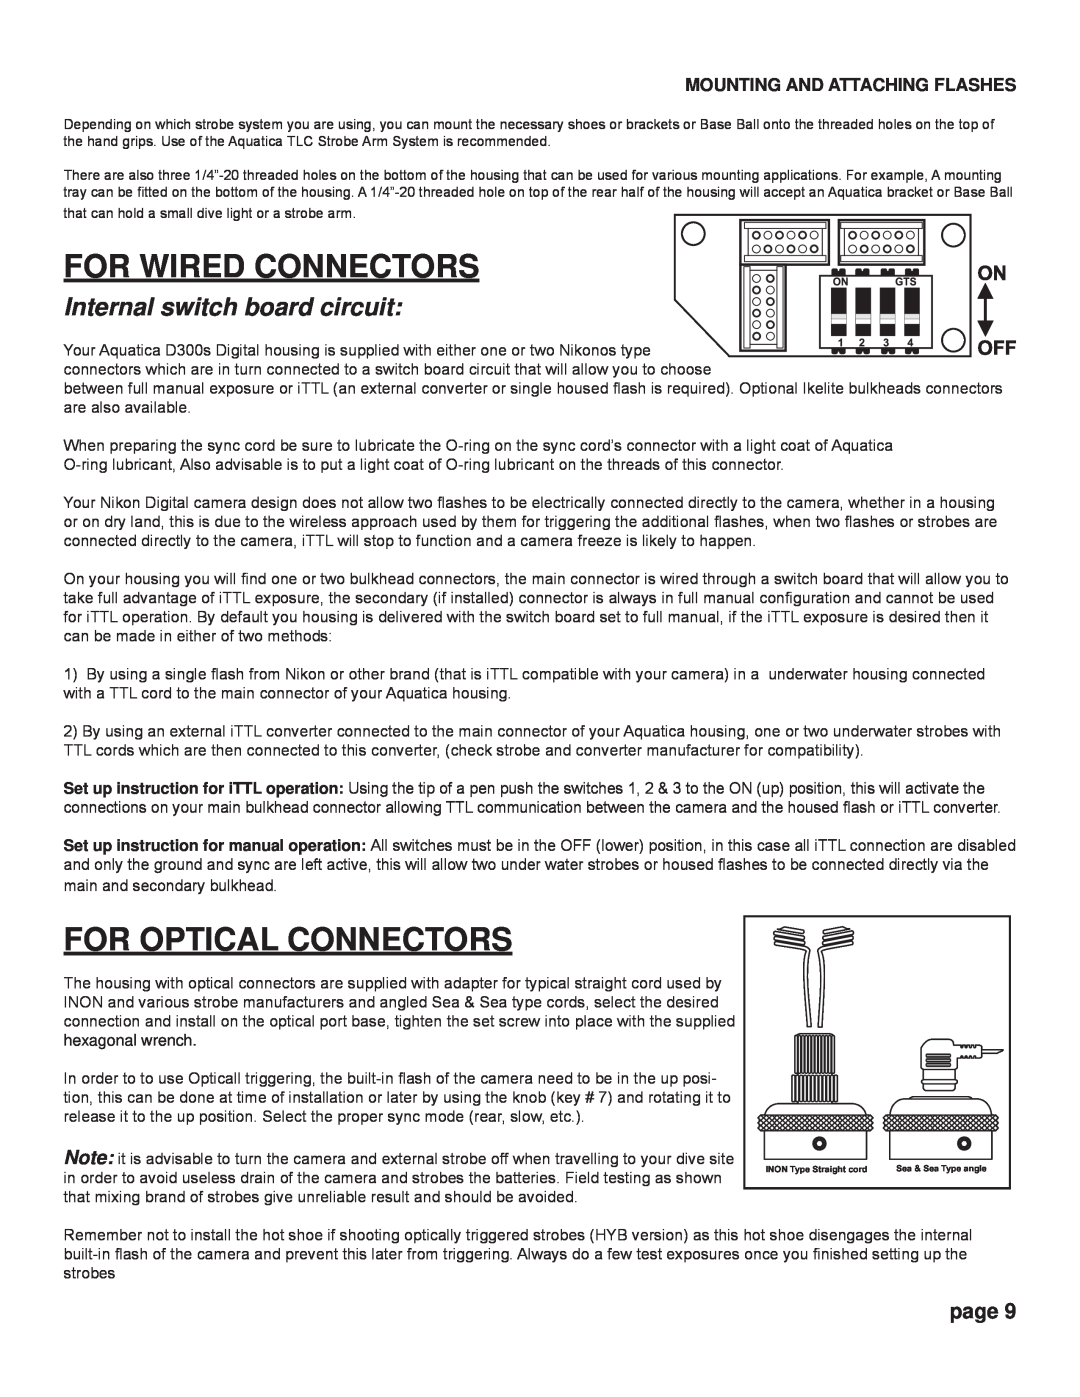 Nikon D300s manual For Wired Connectors, For Optical Connectors, Internal switch board circuit, page 